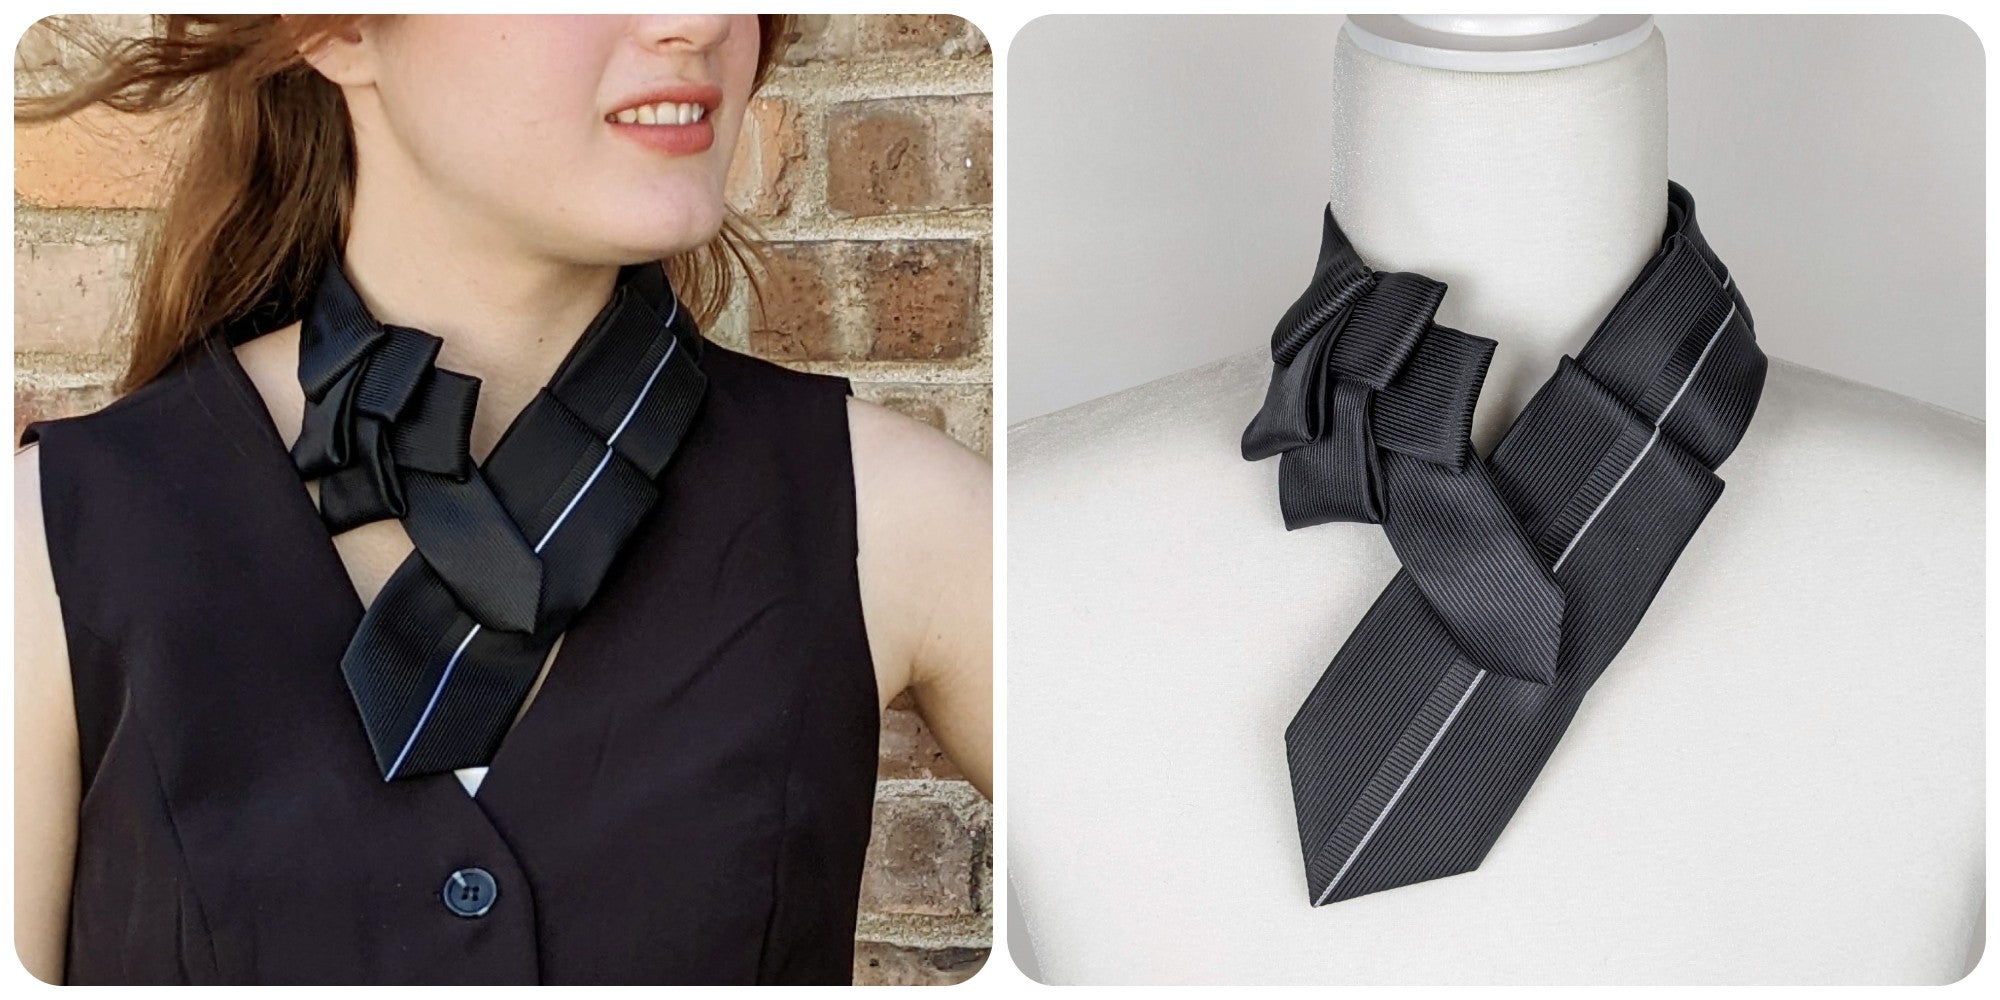 Introducing A New Product: The Skinny Ascot!